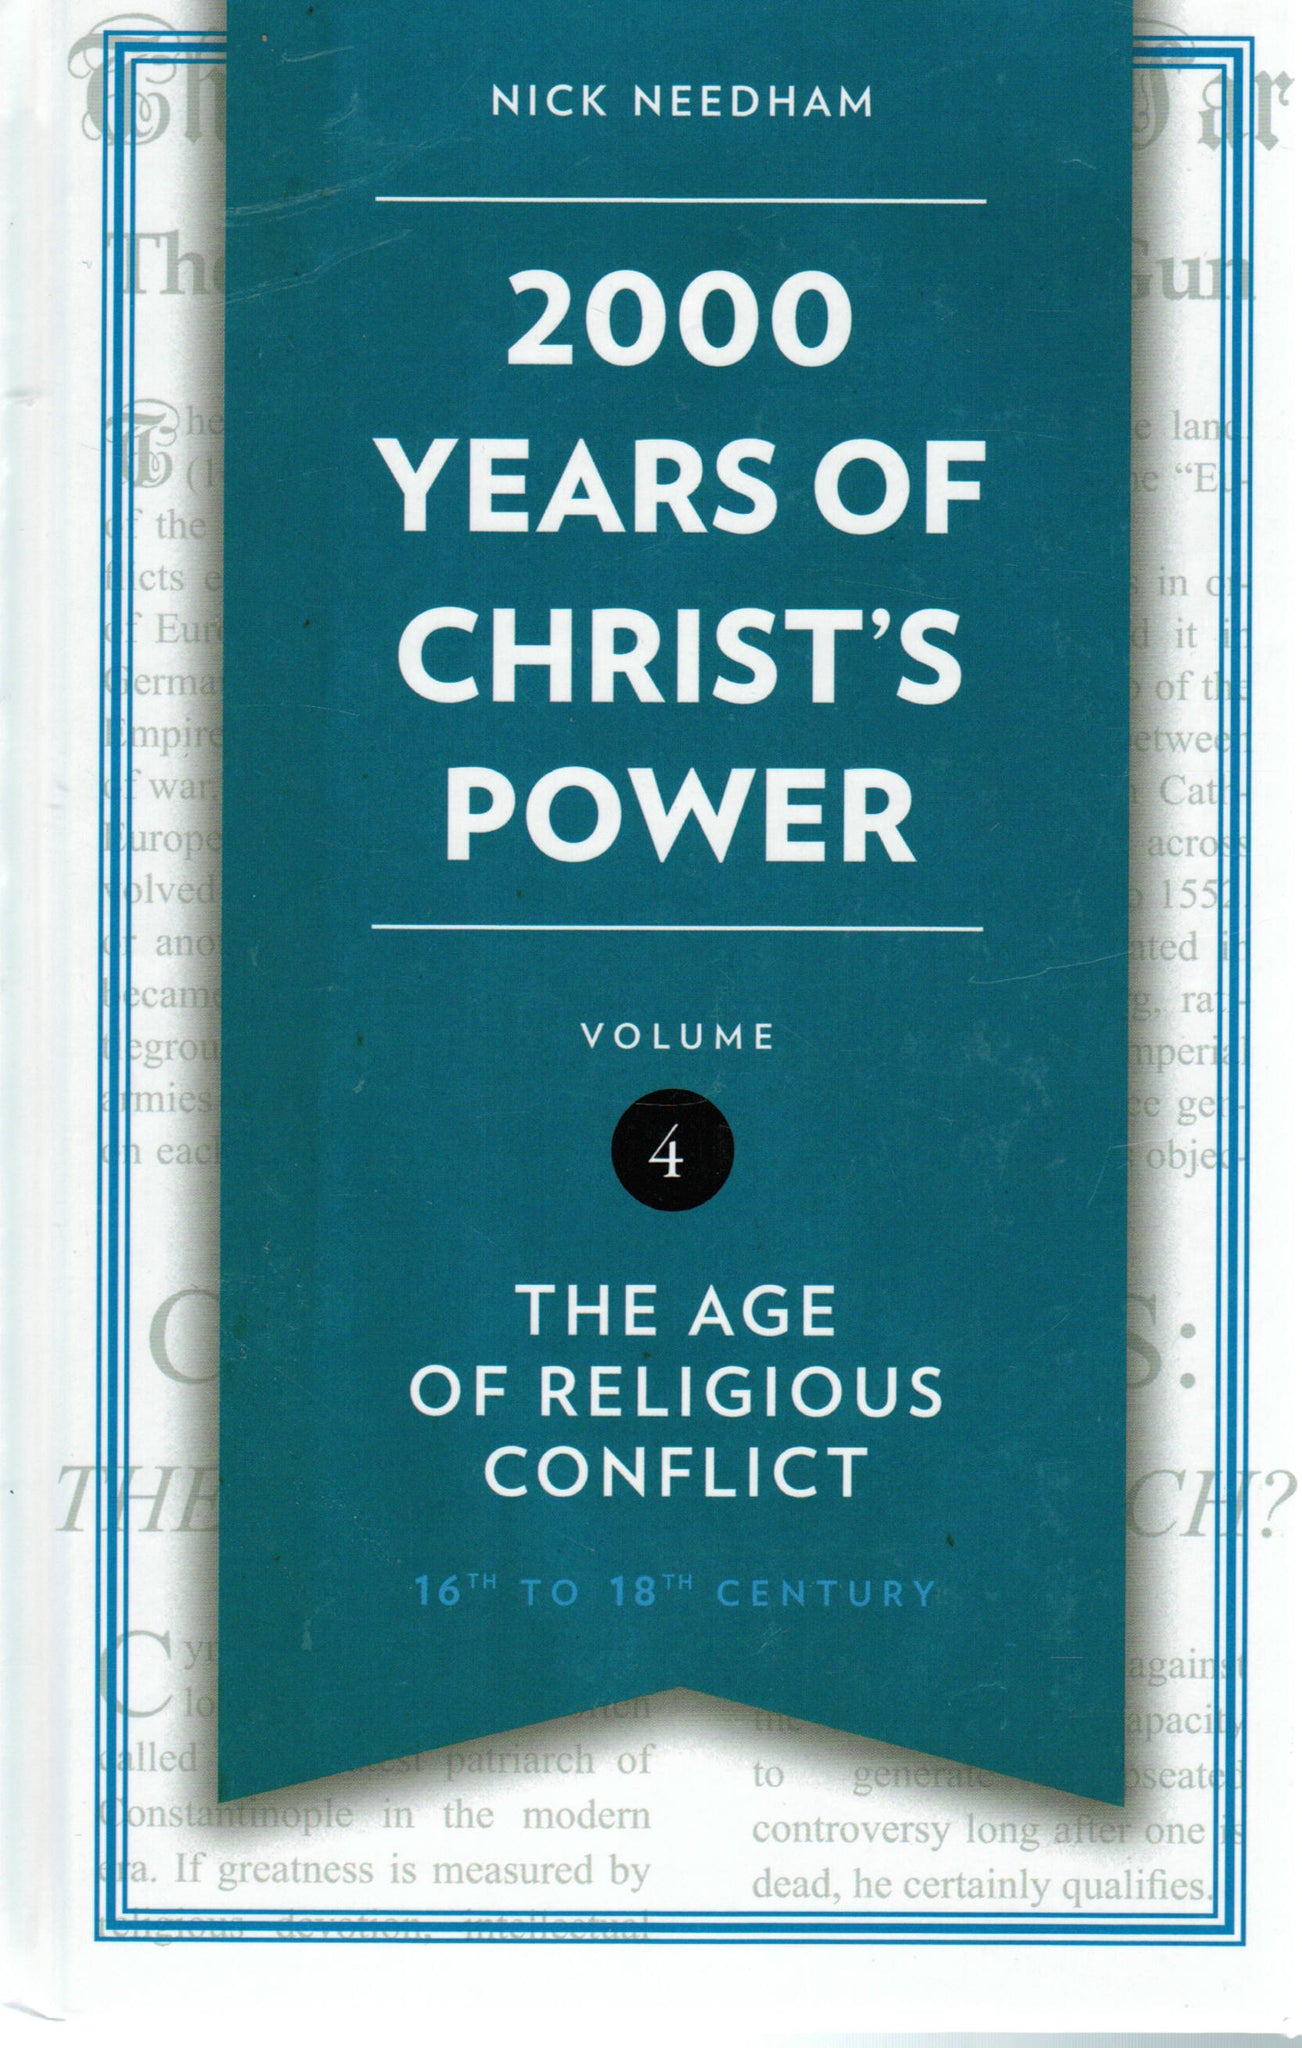 2000 Years of Christ's Power - Volume 4: The Age of Religious Conflict [16th to 18th Century]